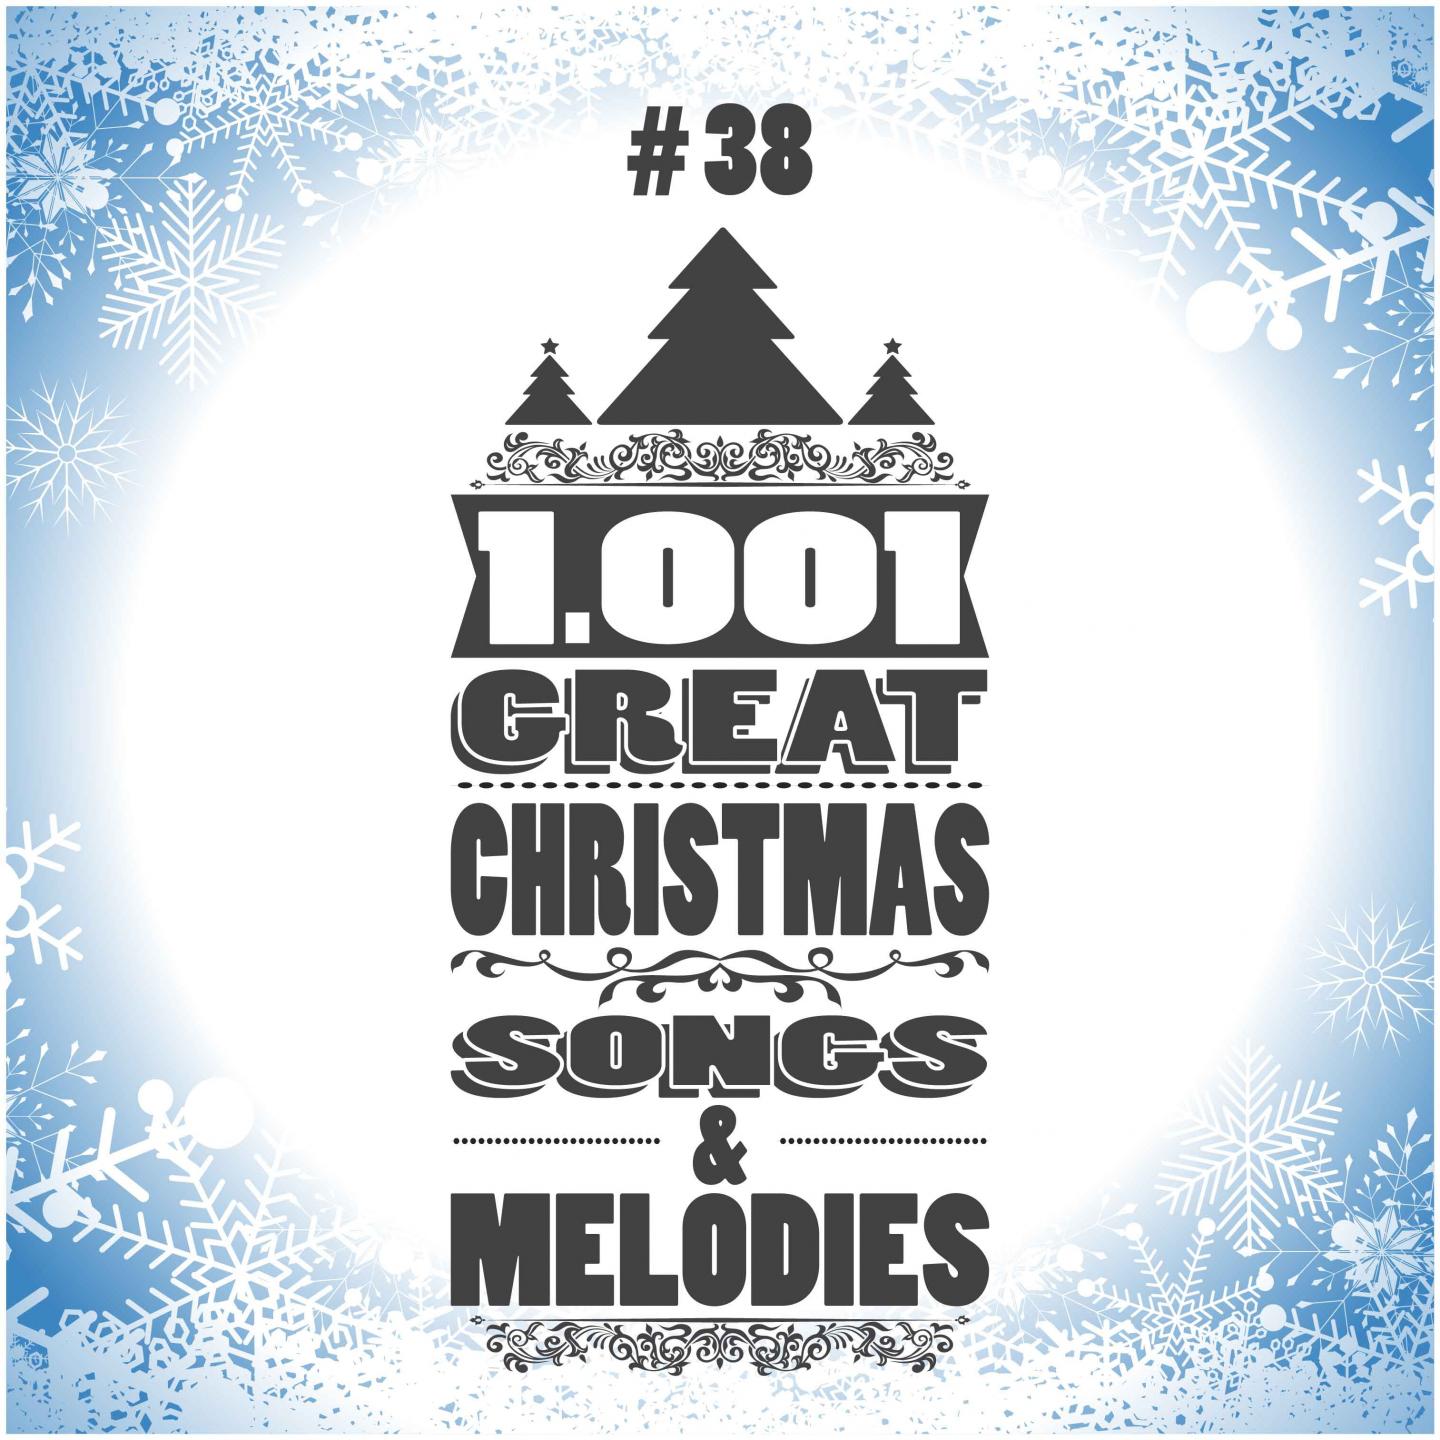 1001 Great Christmas Songs & Melodies, Vol. 38